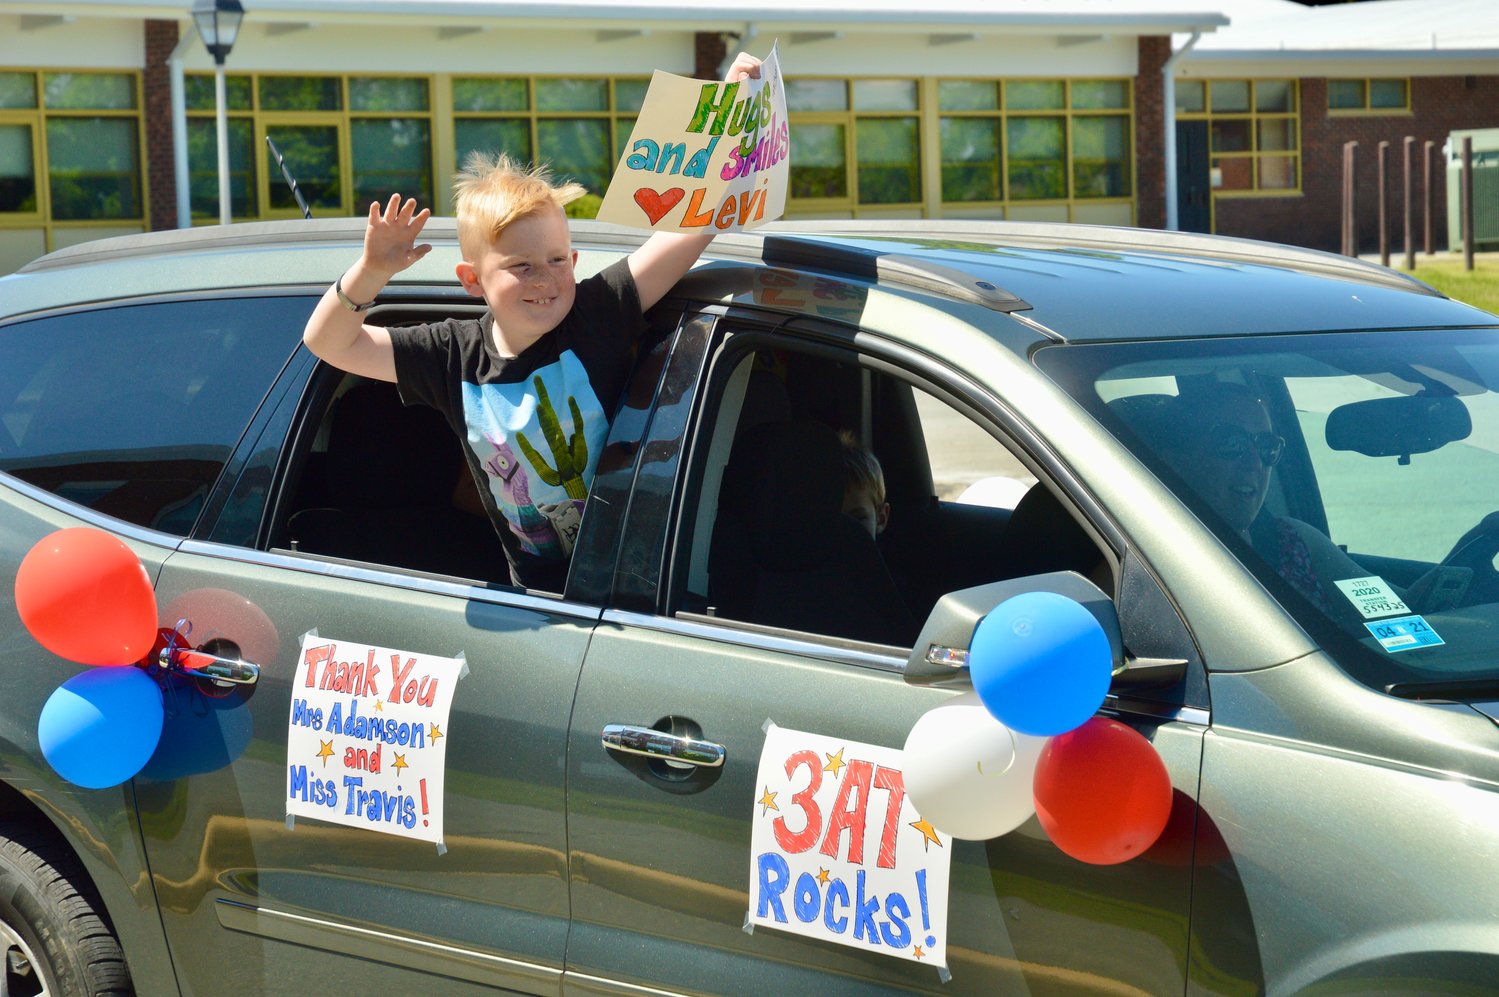 Levi Medeiros, 8, waves to his teacher, Ashley Adamson, during a drive-by parade in the Hathaway School parking lot Tuesday. His mother, Sarahbeth Medeiros, is behind the wheel.